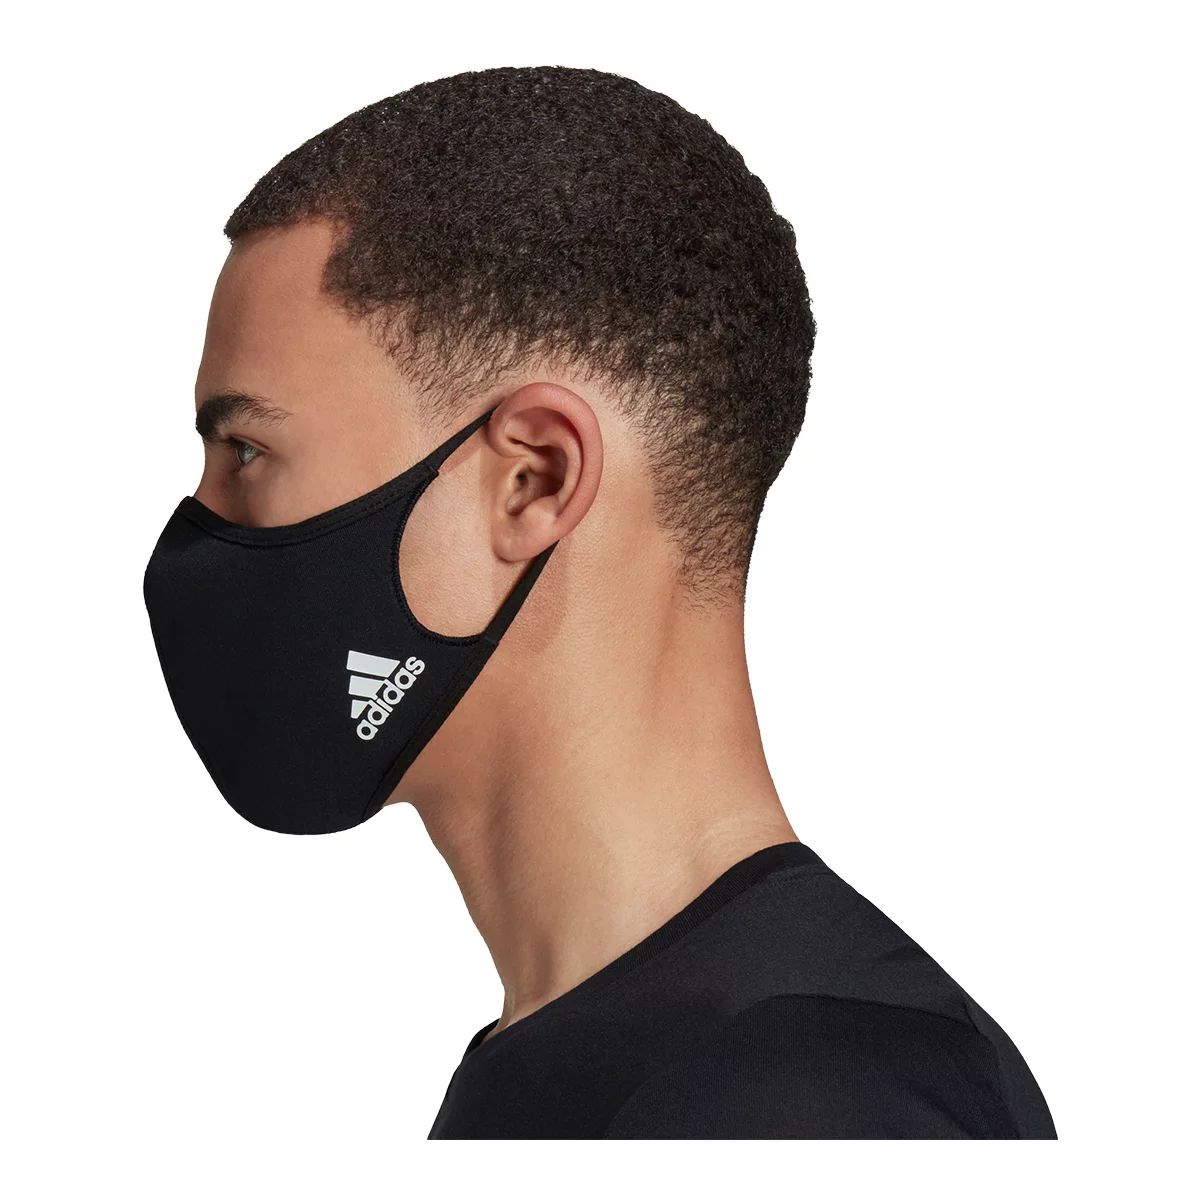 Sporty face masks & coverings to exercise in: From Nike to Adidas